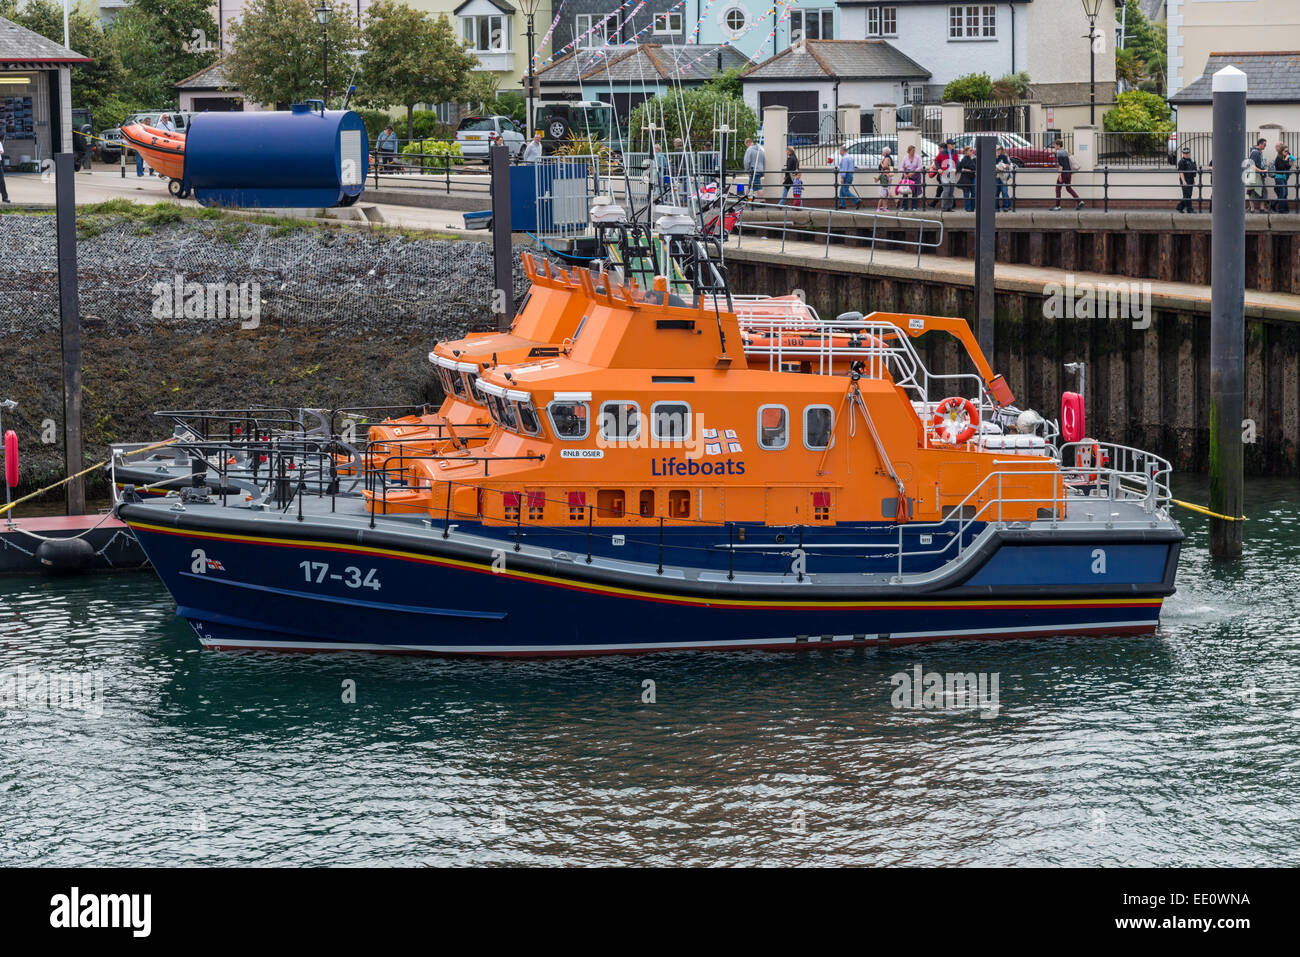 RNLI lifeboats moored in Falmouth Harbor during the 2014 Tall Ships regatta - EDITORIAL USE ONLY Stock Photo